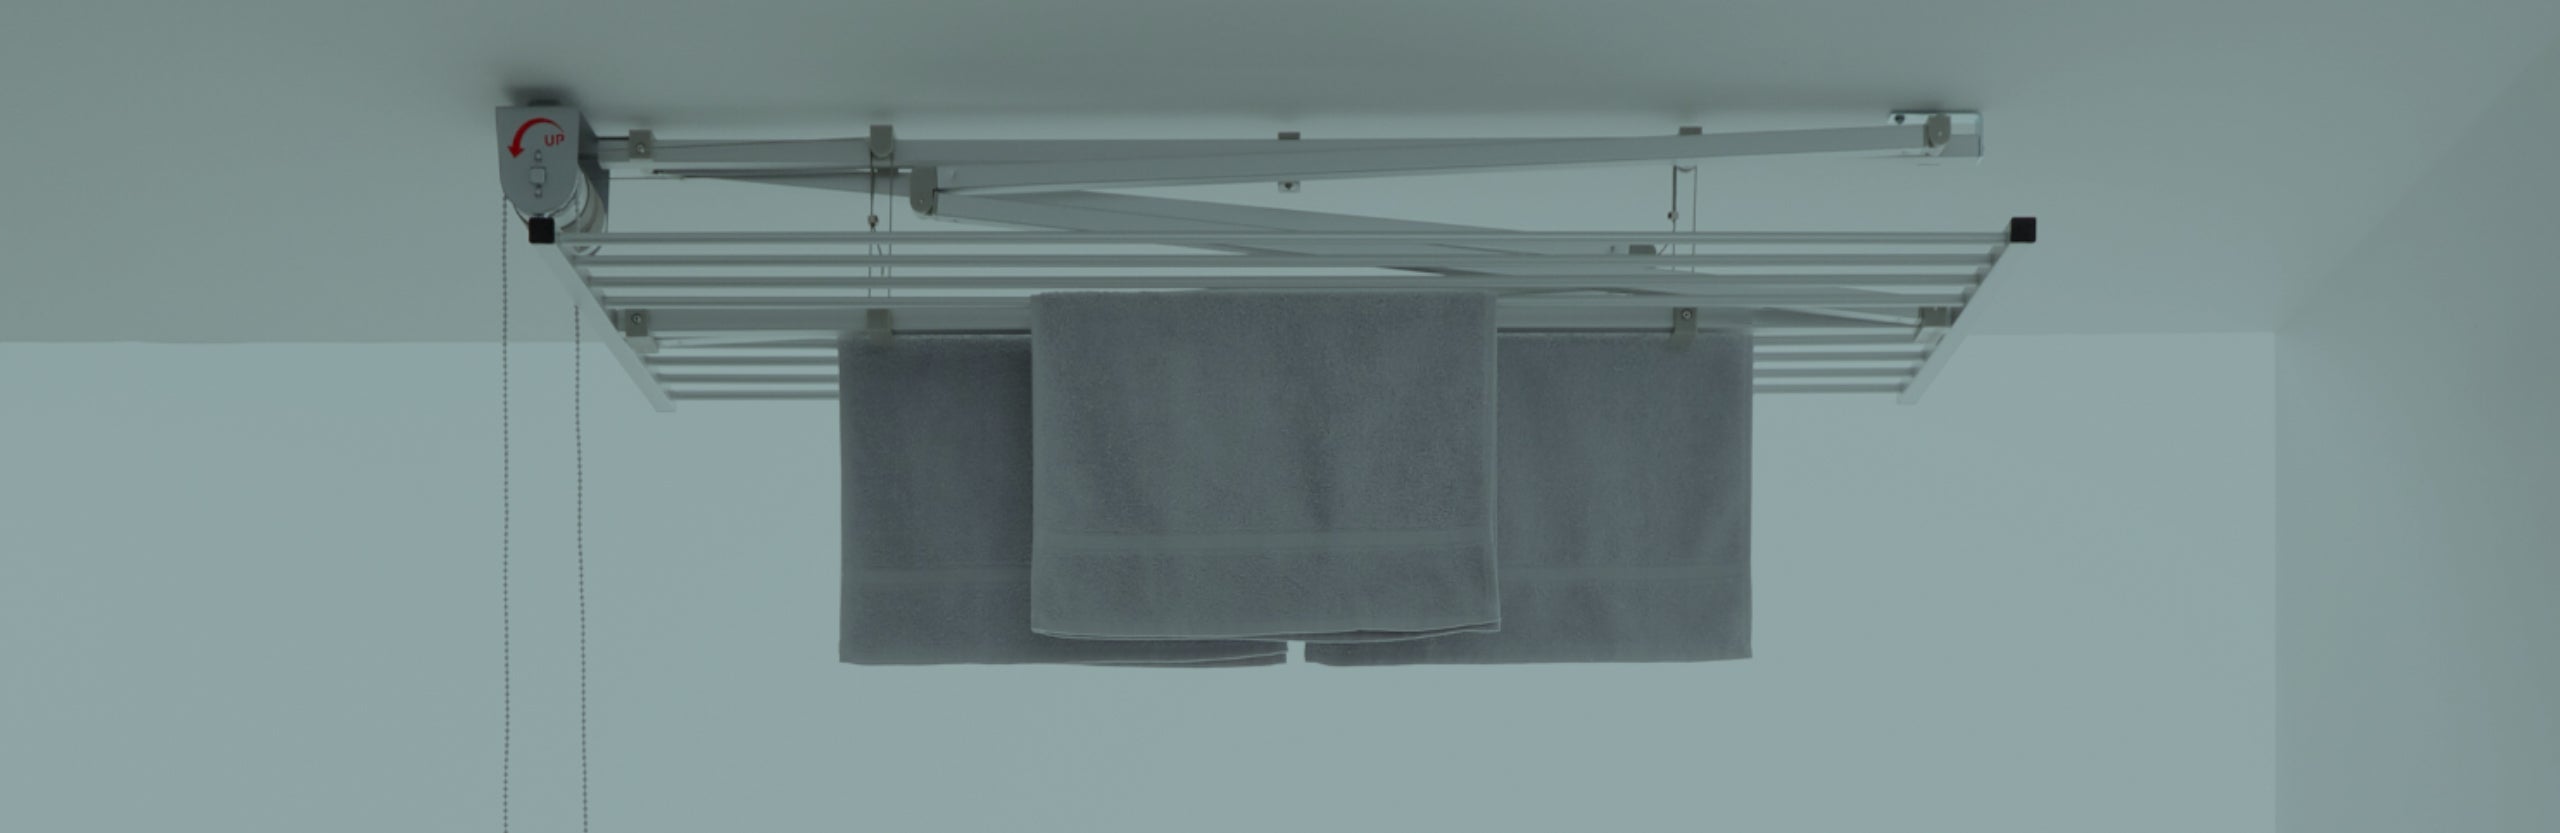 Indoor ceiling mounted clothesline and airer with pulley mechanism for lowering and raising the clothesline. Unit pictured is Foxydry Mini with laundry drying and raised up to the ceiling.